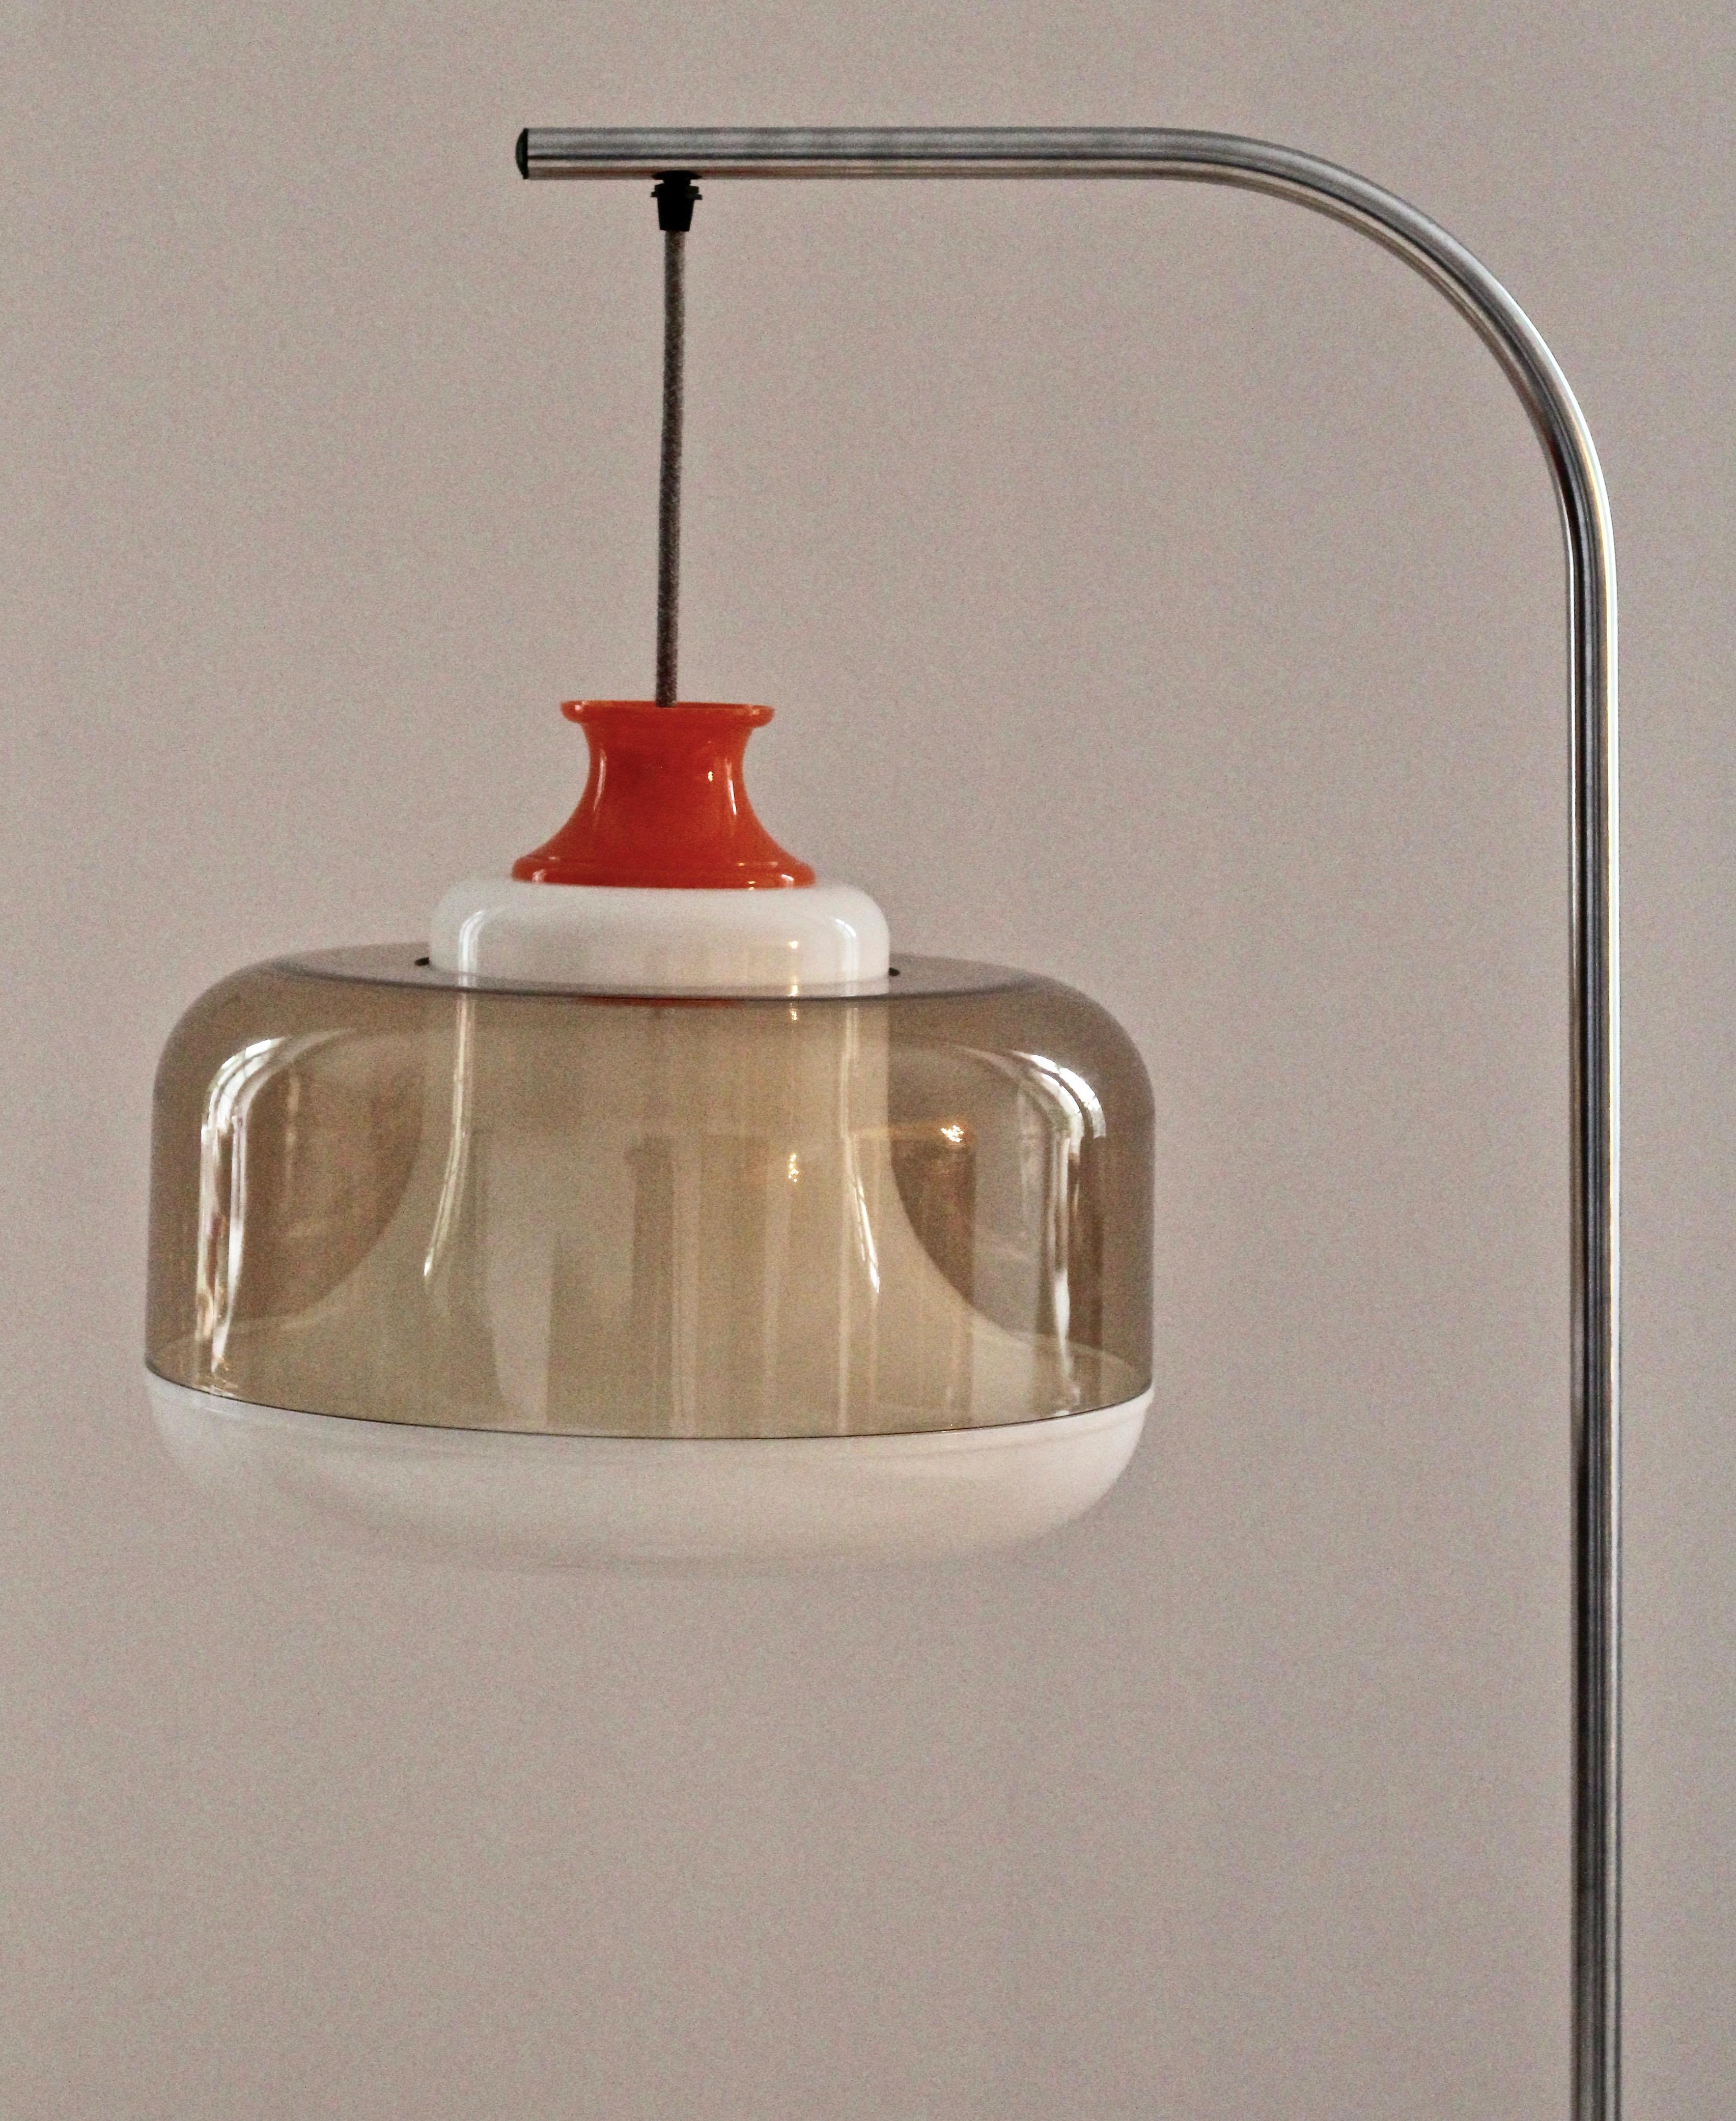 space age lamp